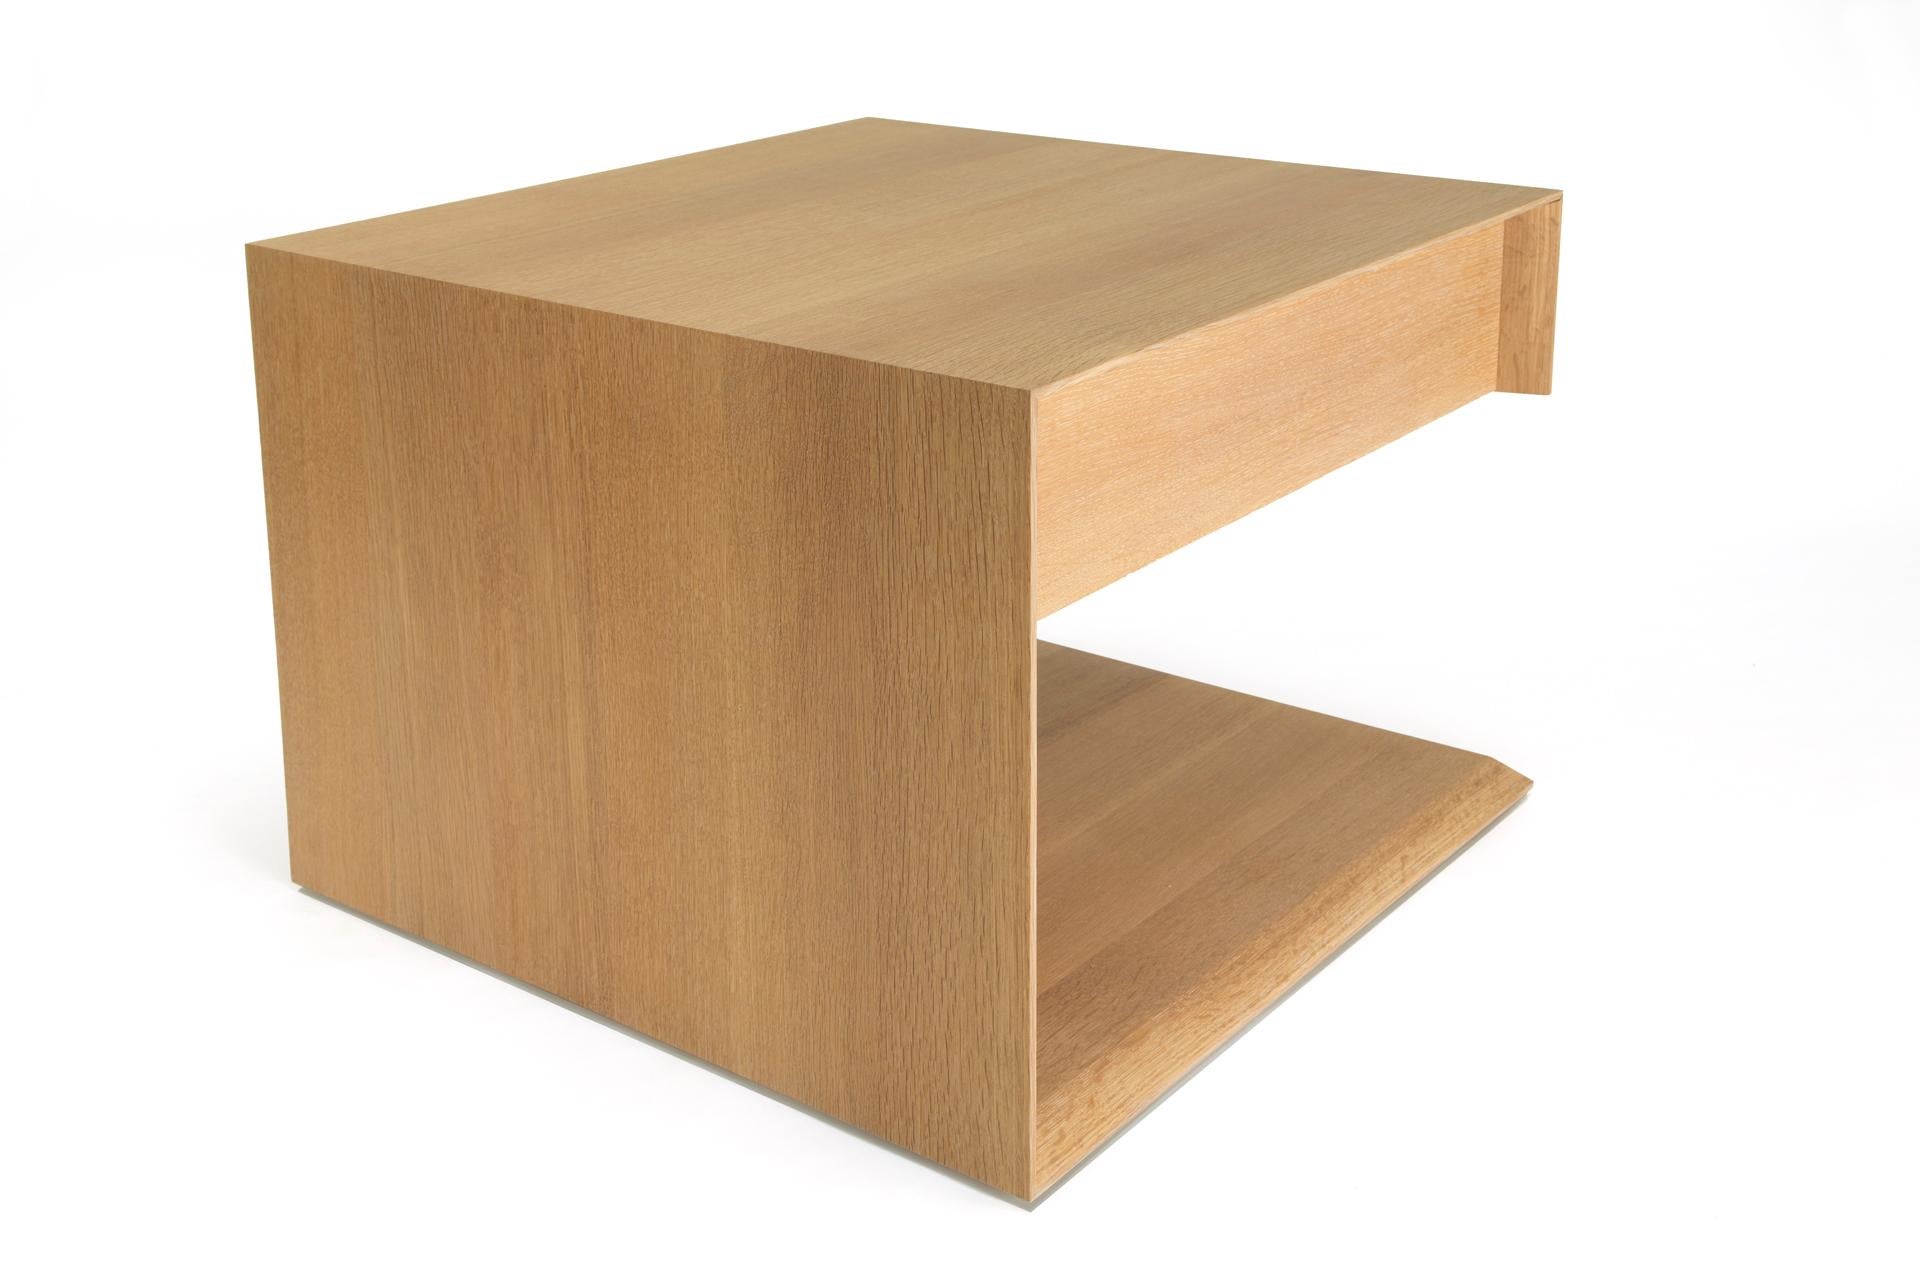 Hand-Crafted Modern Wood End Table in Solid White Oak, by Studio DiPaolo